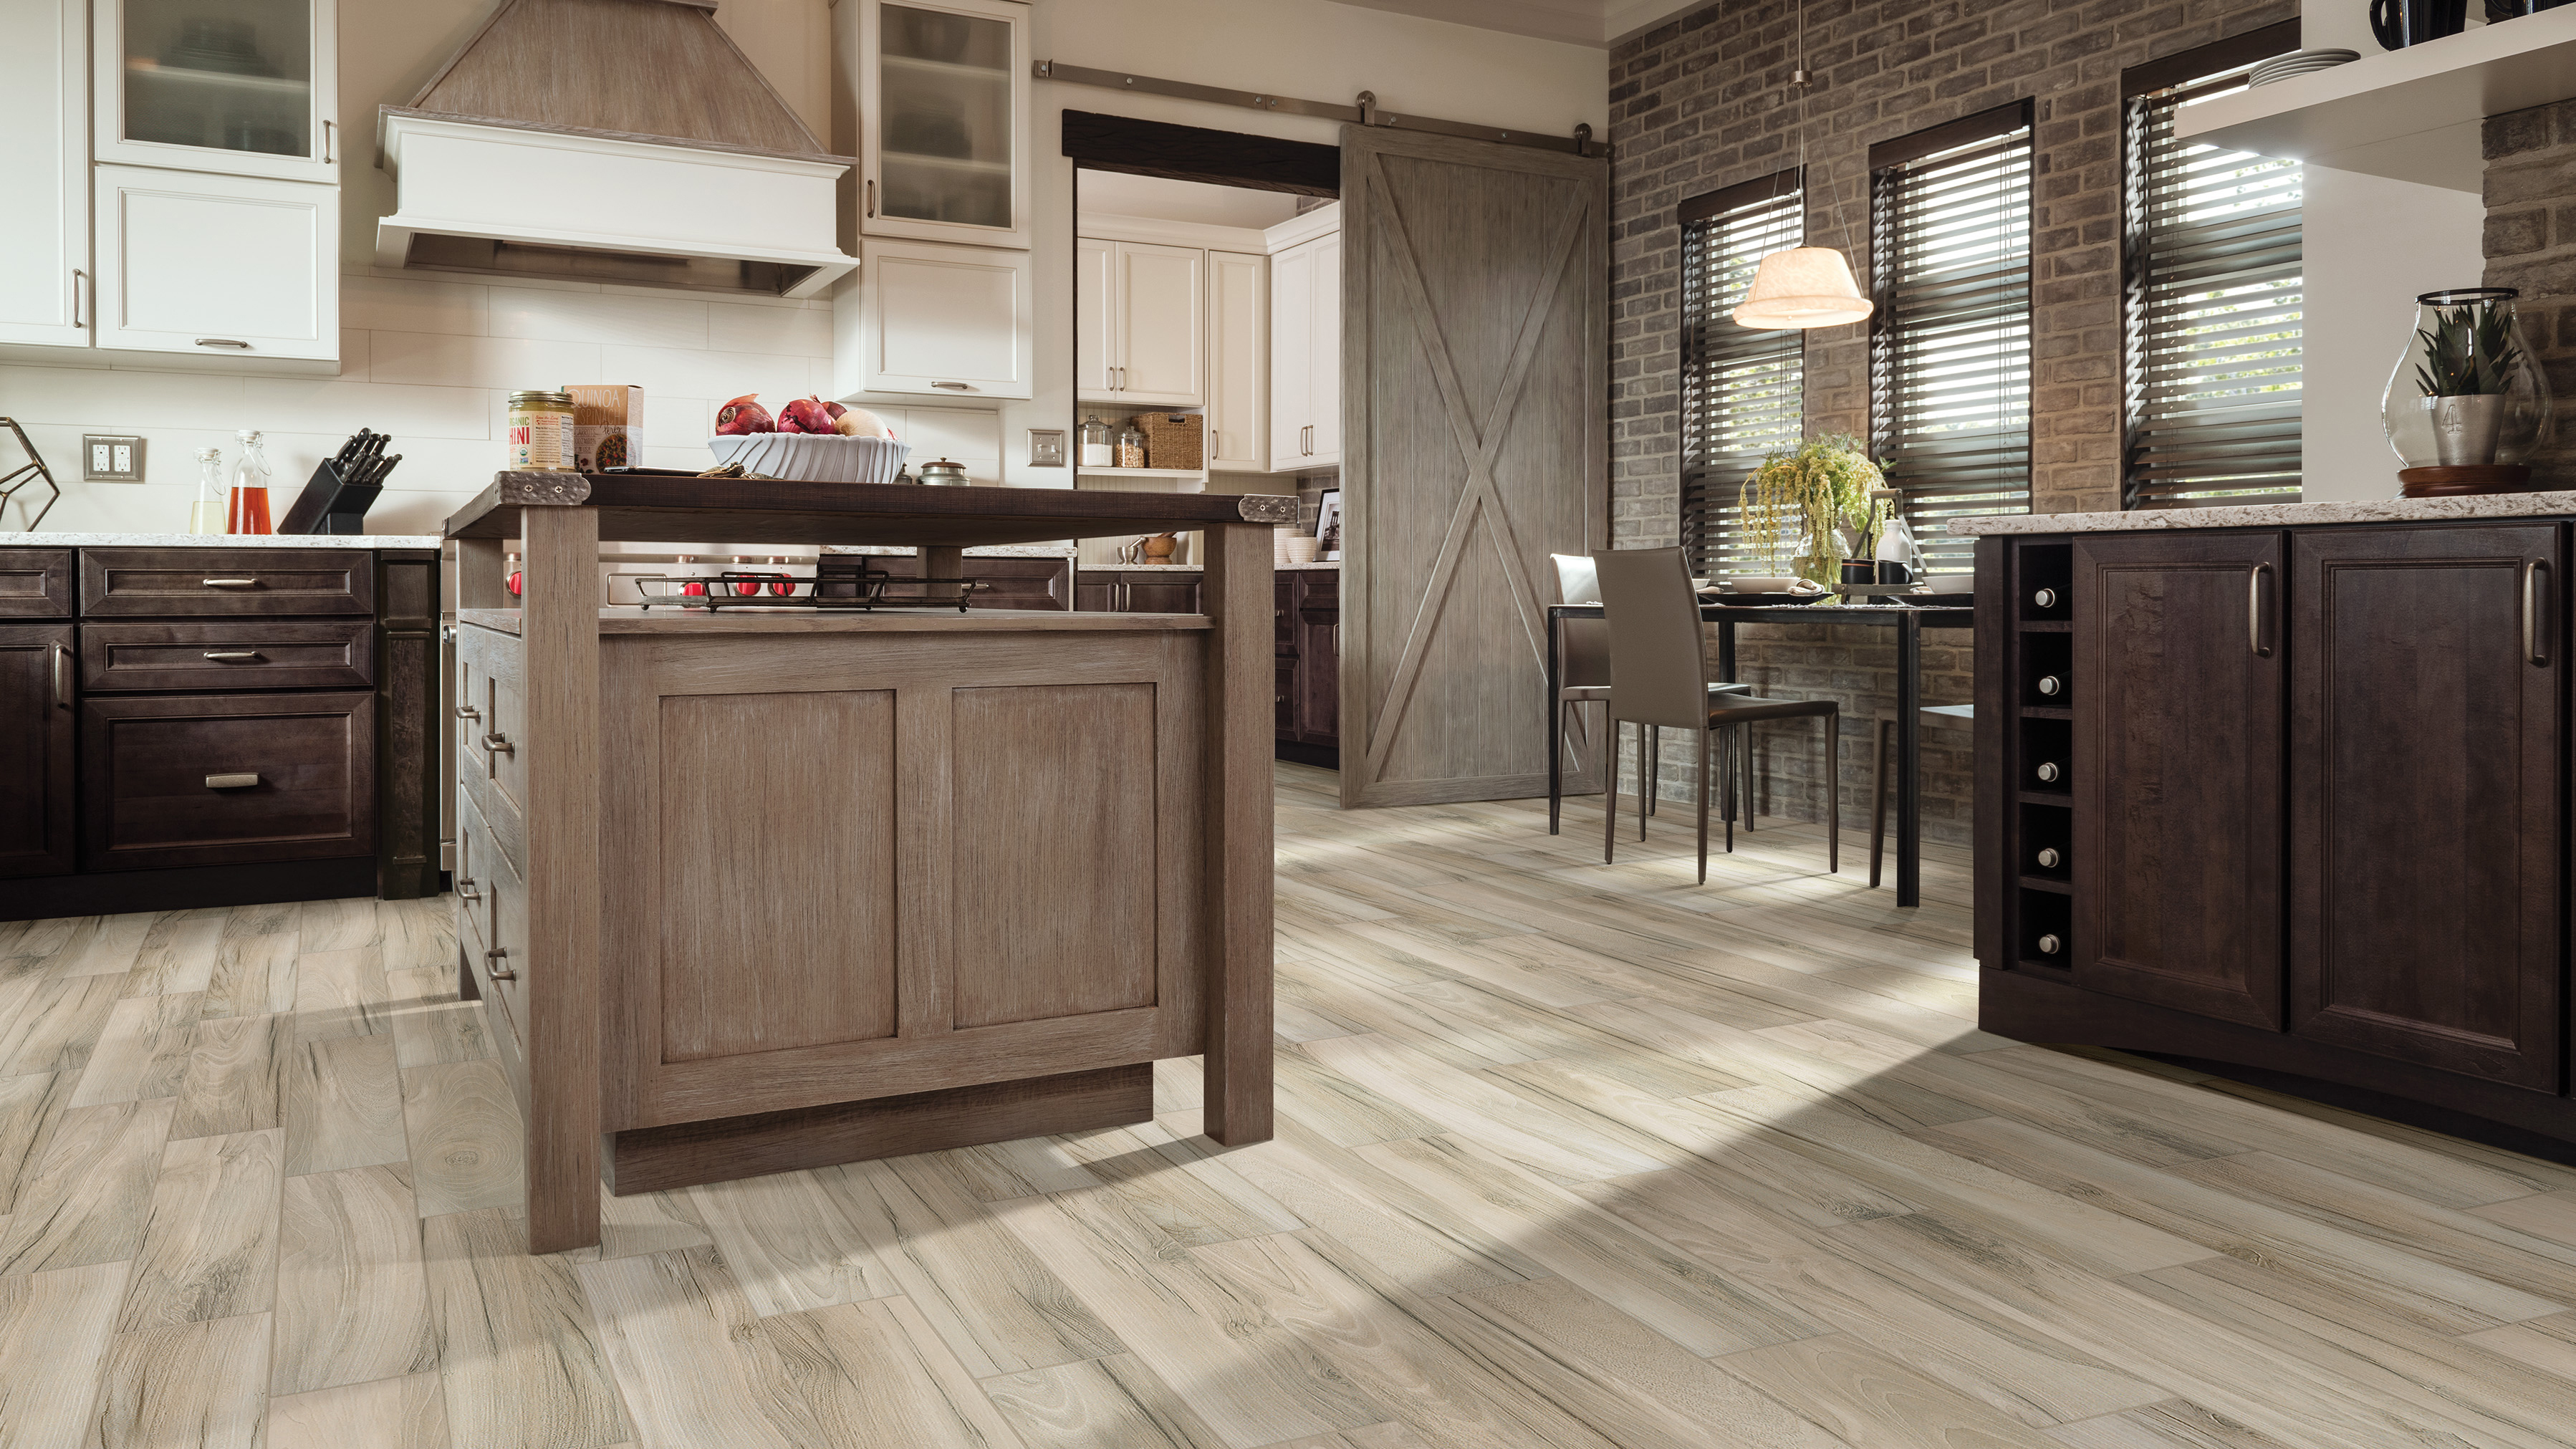 Wood-look tile flooring in a kitchen, installation services available.